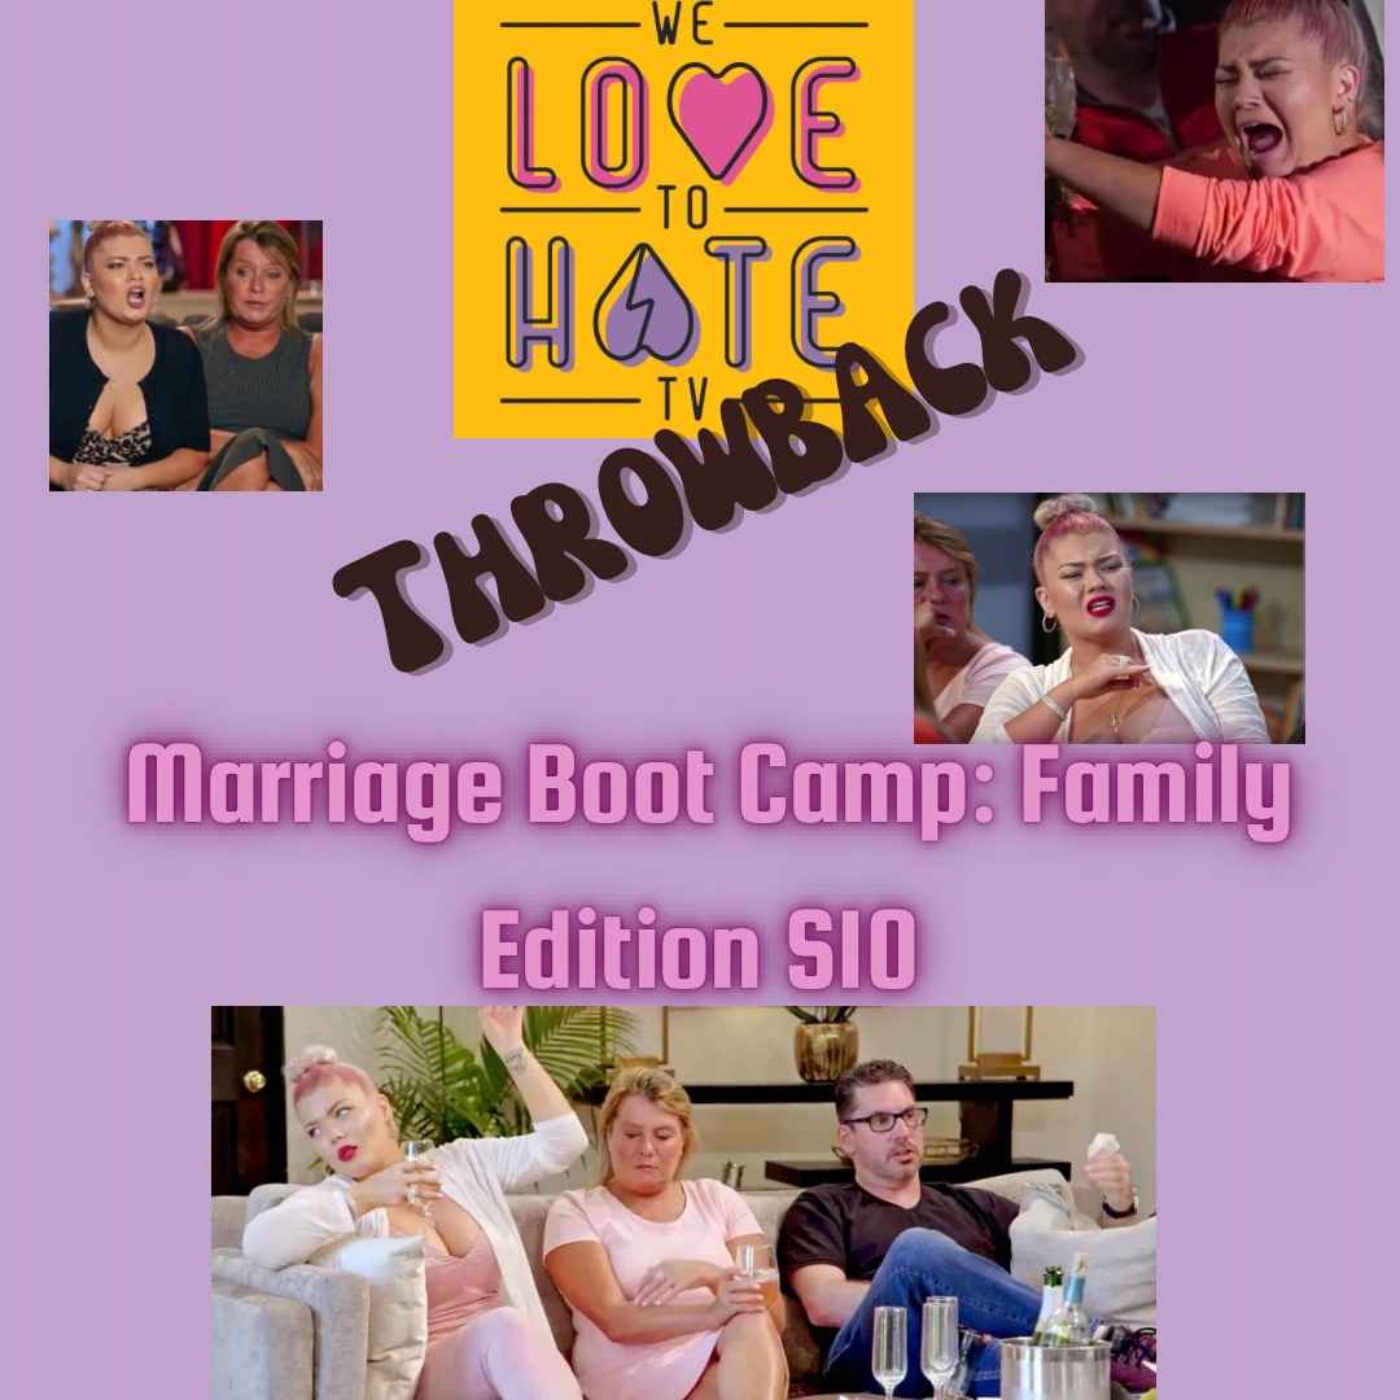 Marriage Boot Camp S10 E9 *THROWBACK* ”The Last Lie”